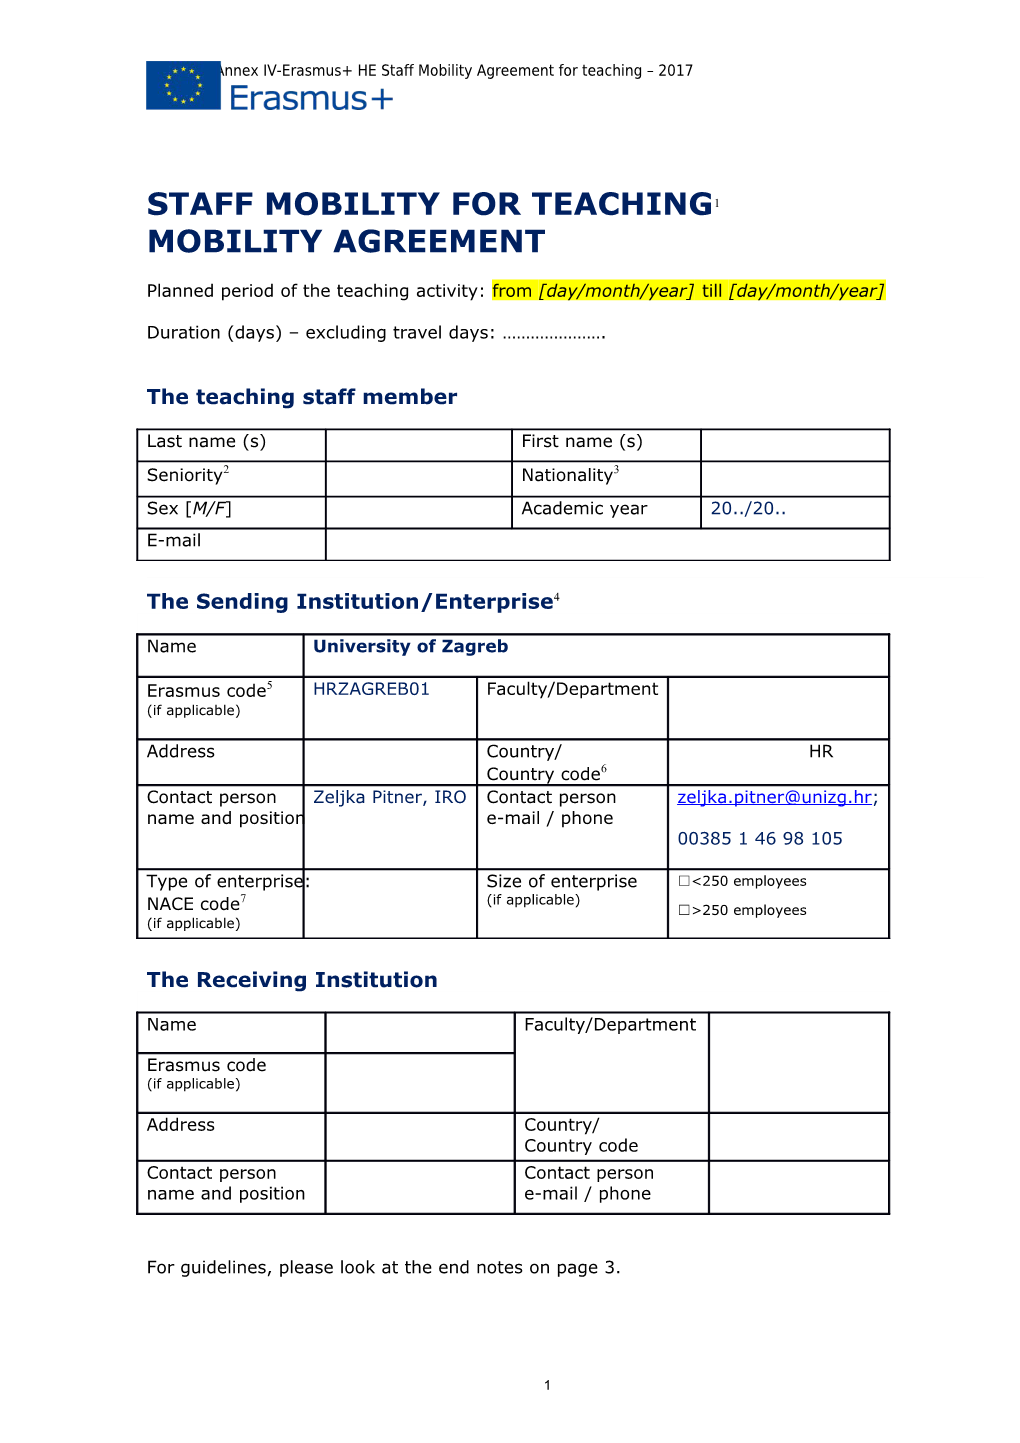 Gfna-II-C-Annex IV-Erasmus+ HE Staff Mobility Agreement for Teaching 2017